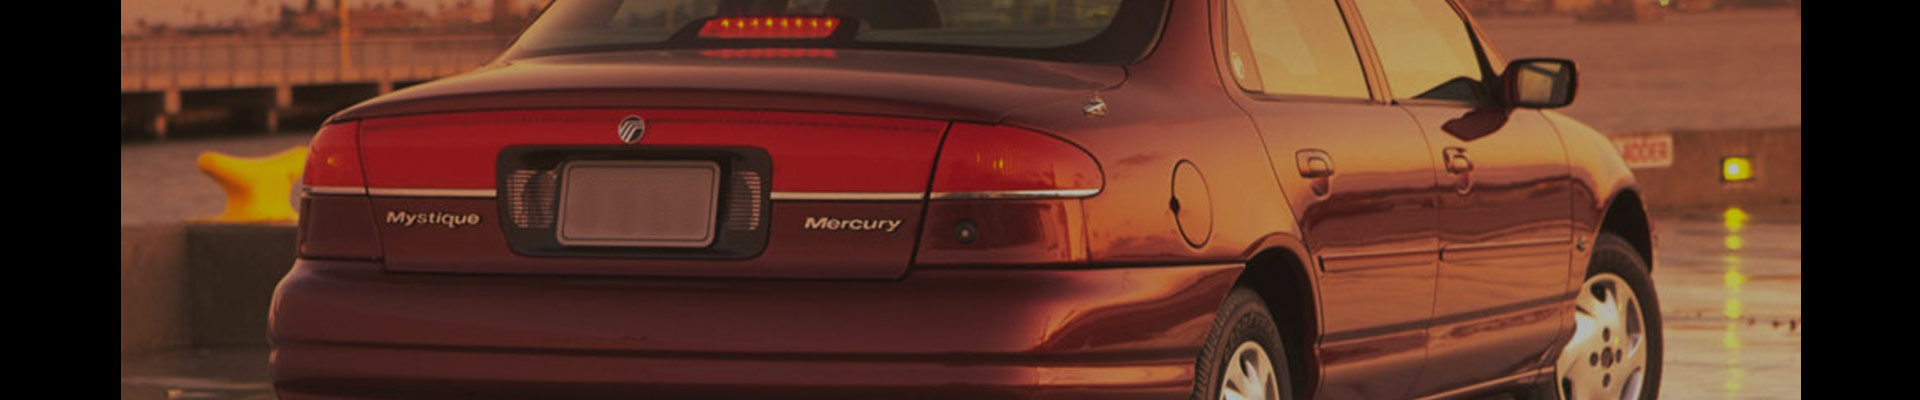 Shop Replacement and OEM Mercury Mystique Parts with Discounted Price on the Net